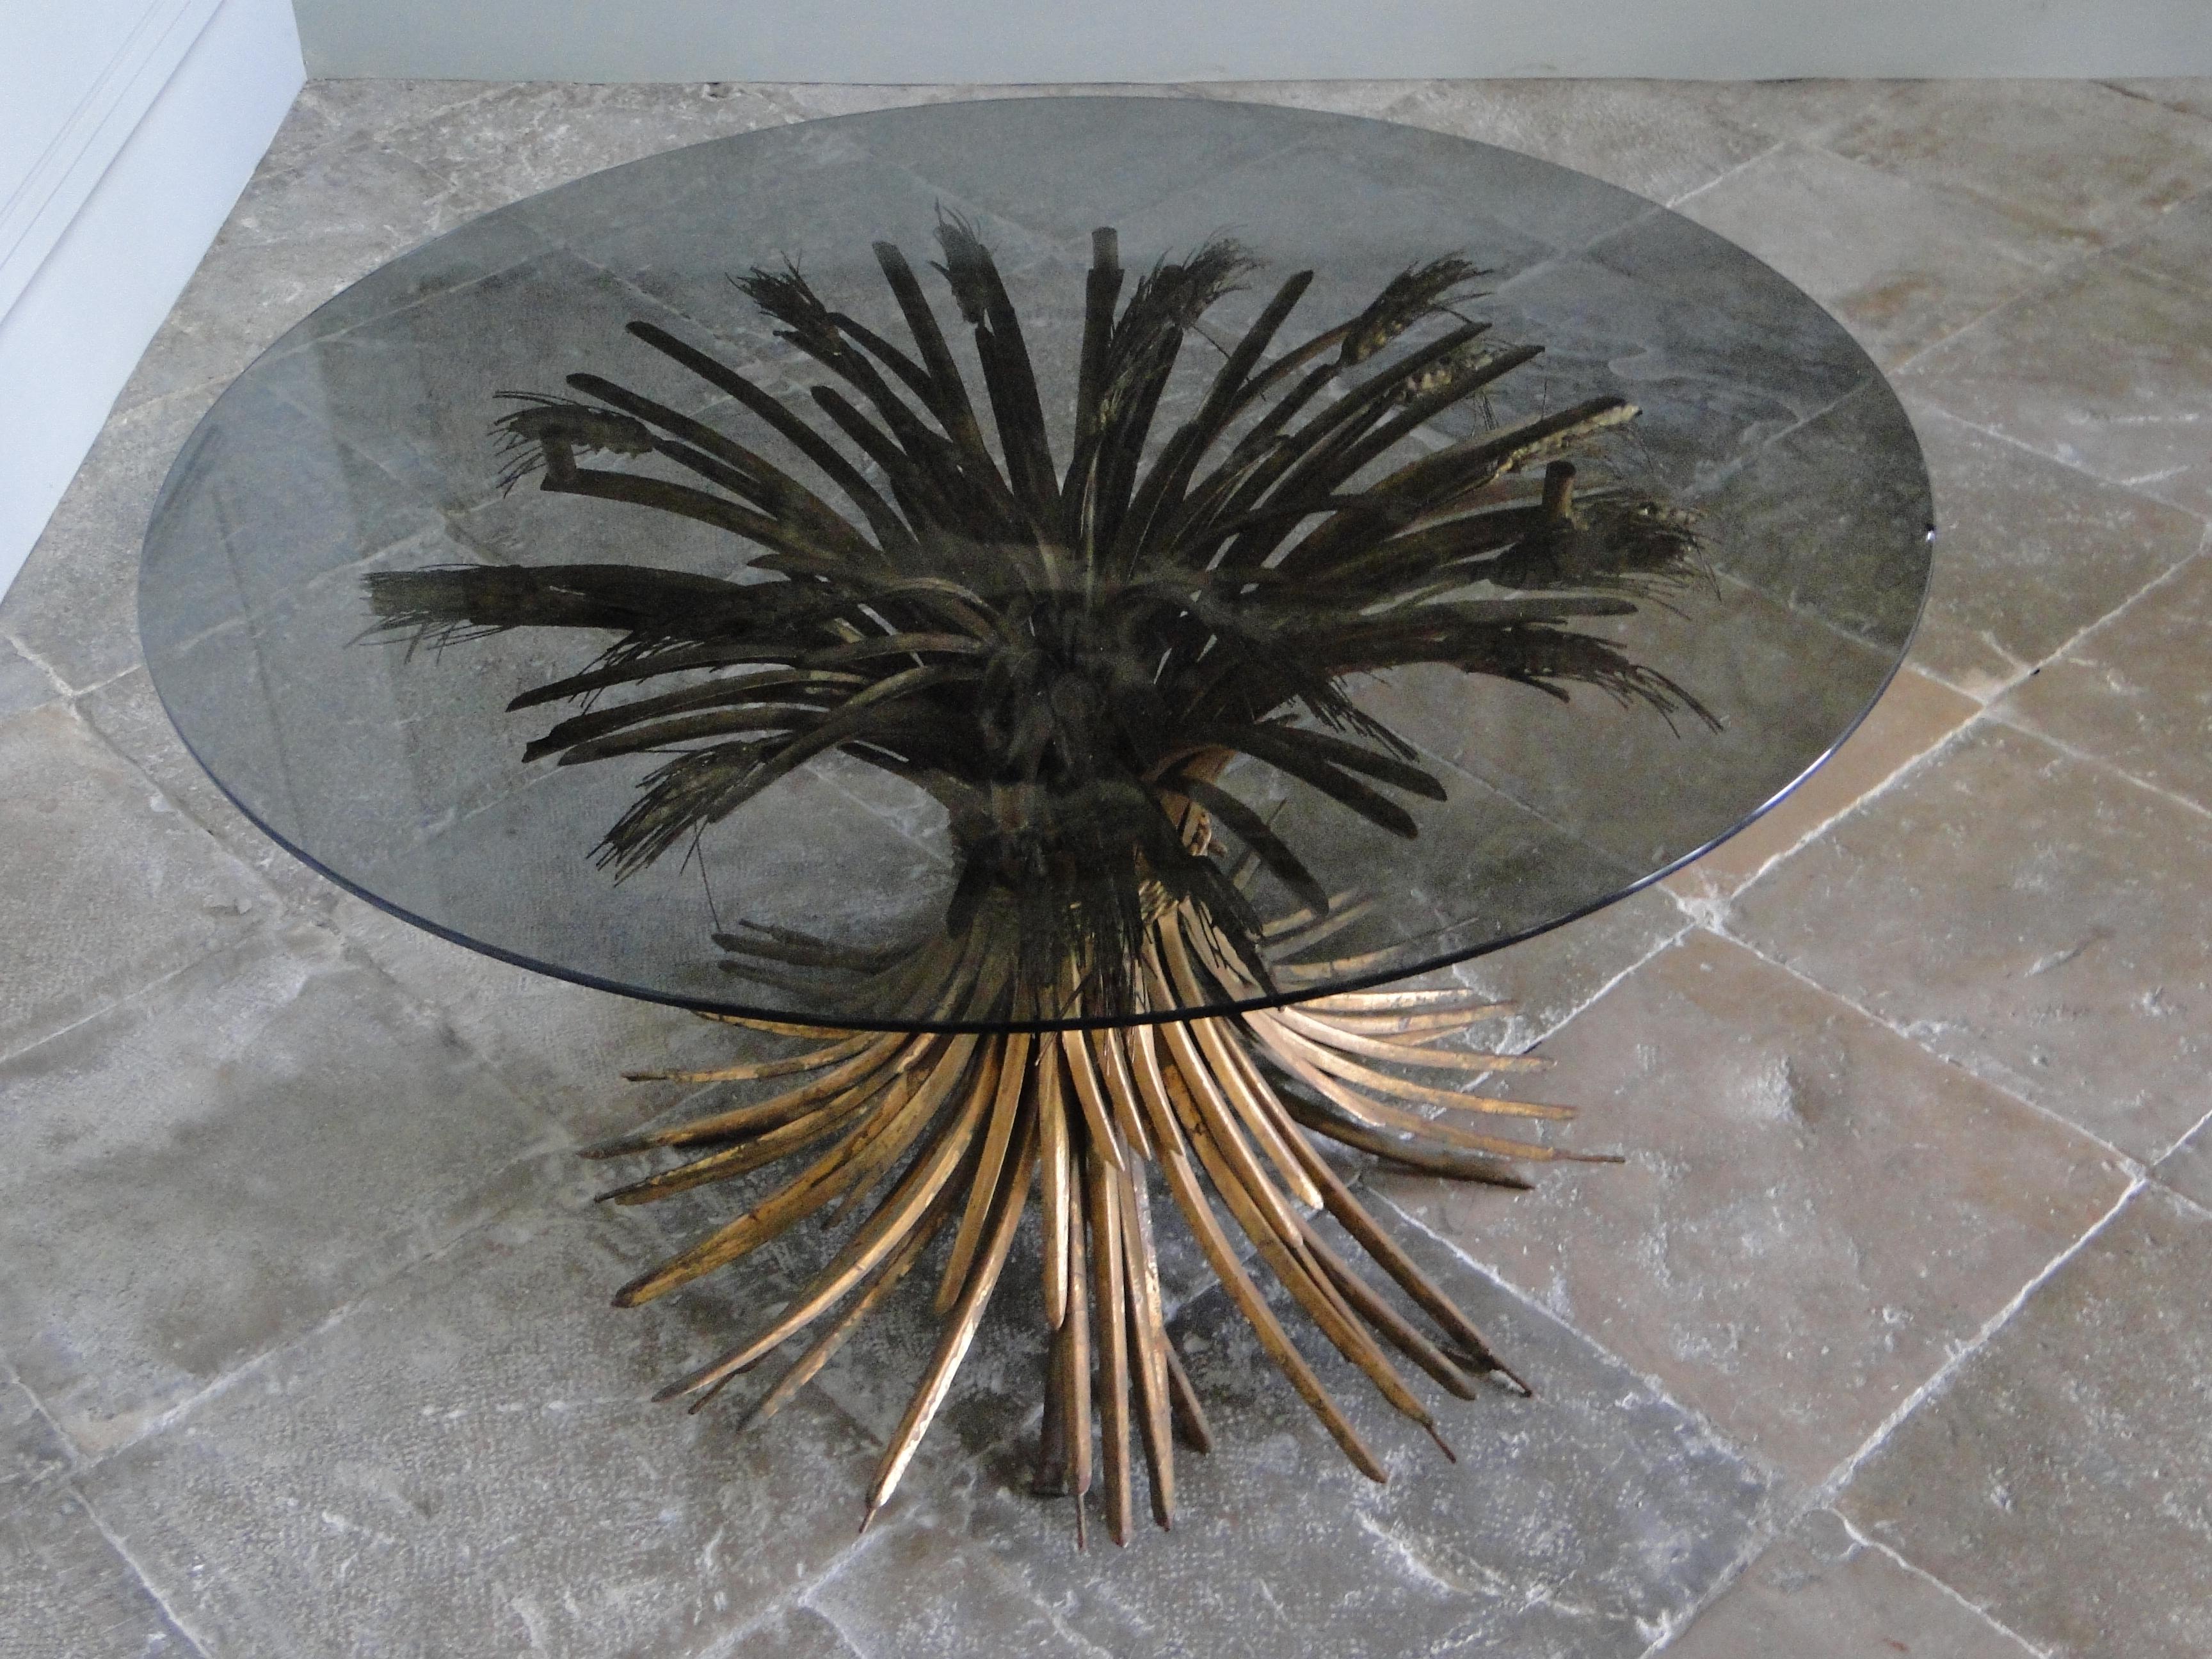 Sheaf of Wheat beard sofa table similar to the one sold on Chisties by Bergé. They have been made for Coco Chanel and Yves St Laurent in the 70th. Gilt Iron with a smoked glass top.